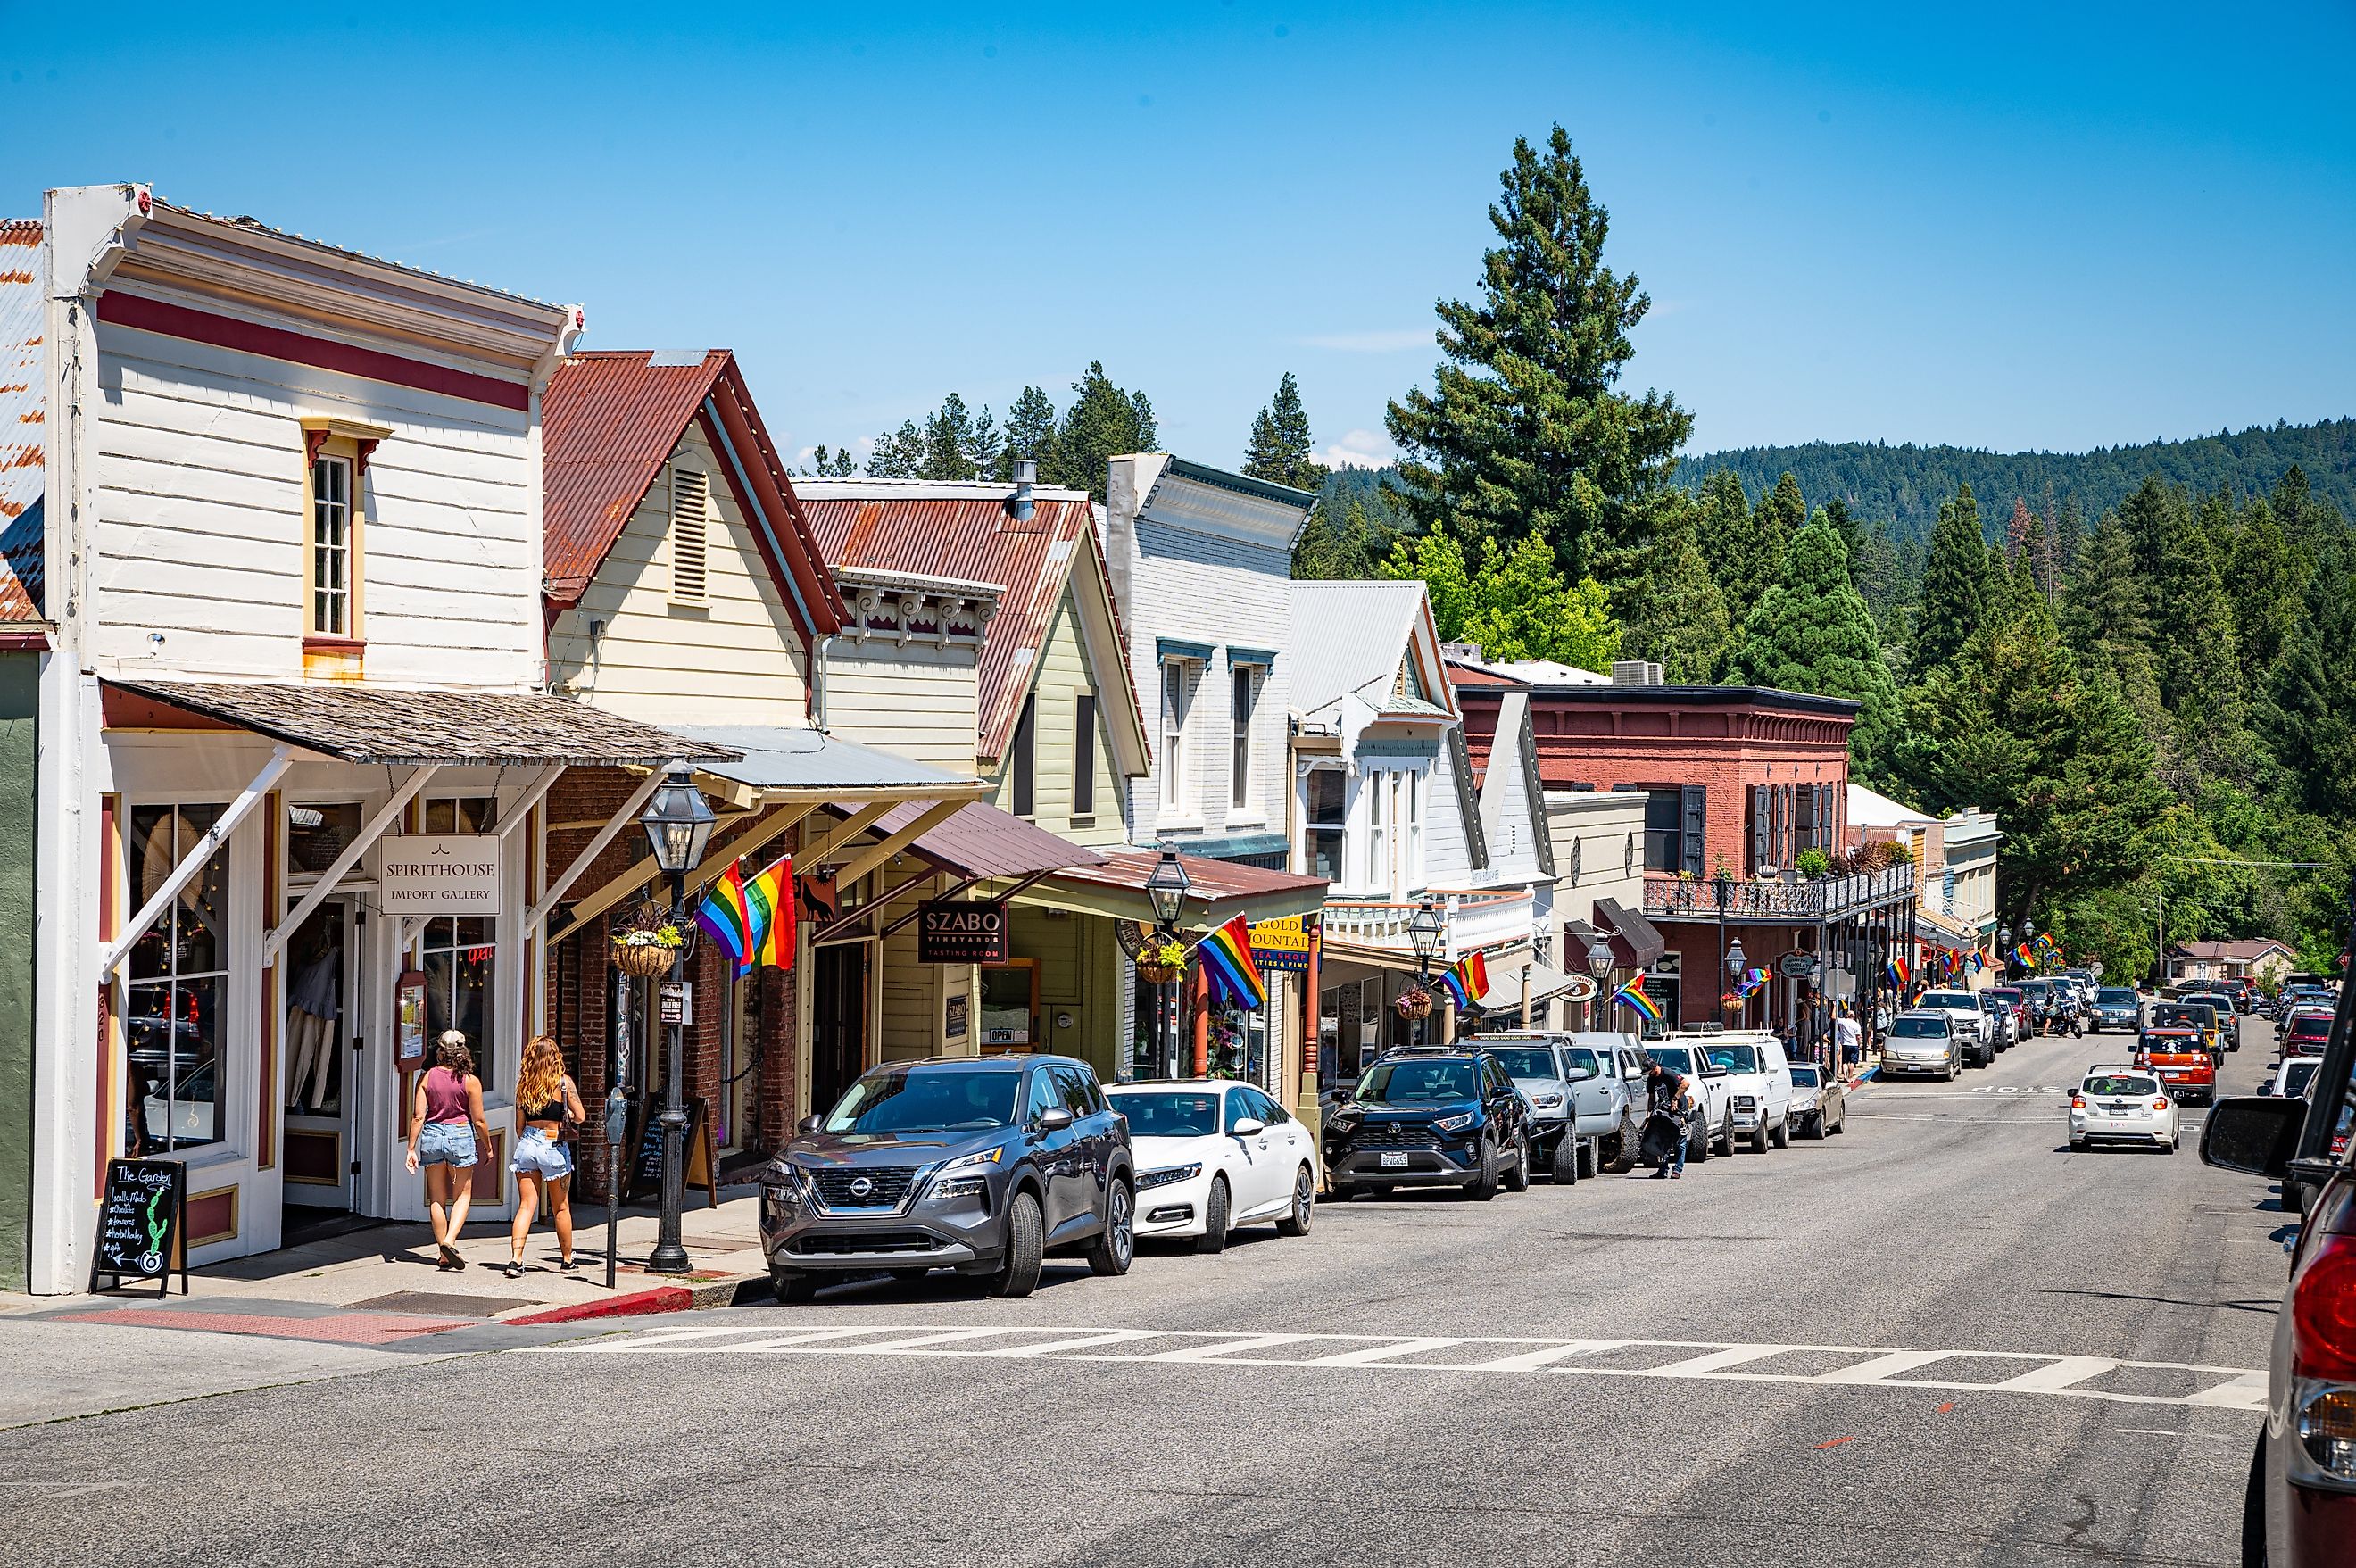 Nevada City, California: Shops and eateries along Broad Street adorned with rainbow flags during Pride Month. Editorial credit: Chris Allan / Shutterstock.com